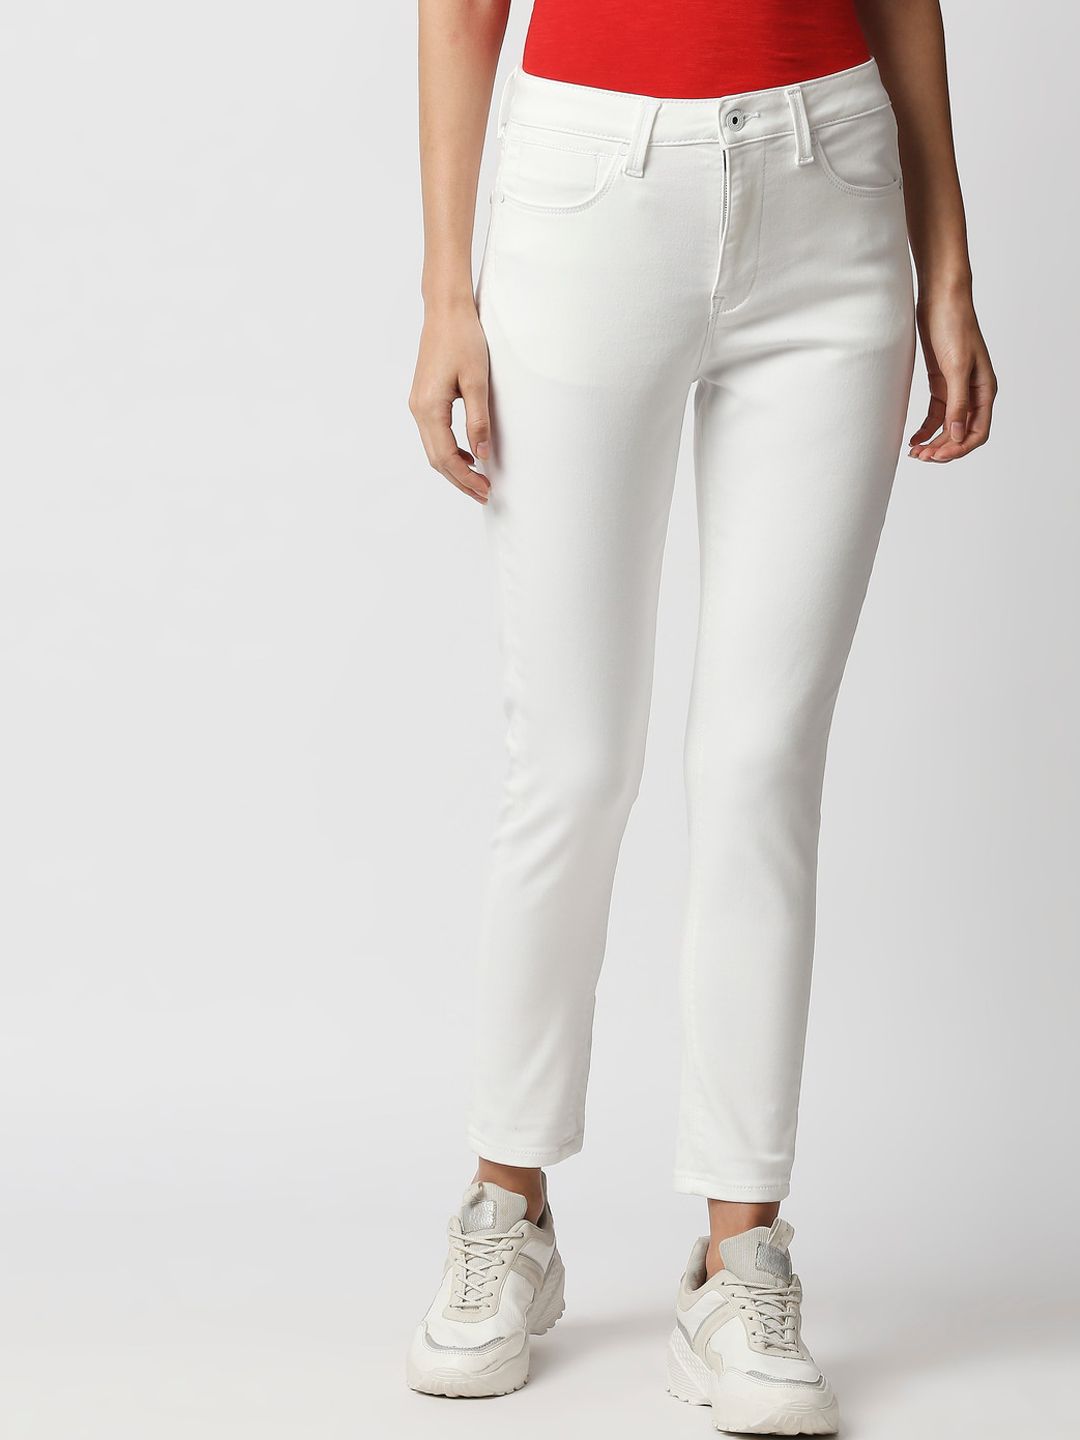 Pepe Jeans Women White Skinny Fit High-Rise Stretchable Jeans Price in India